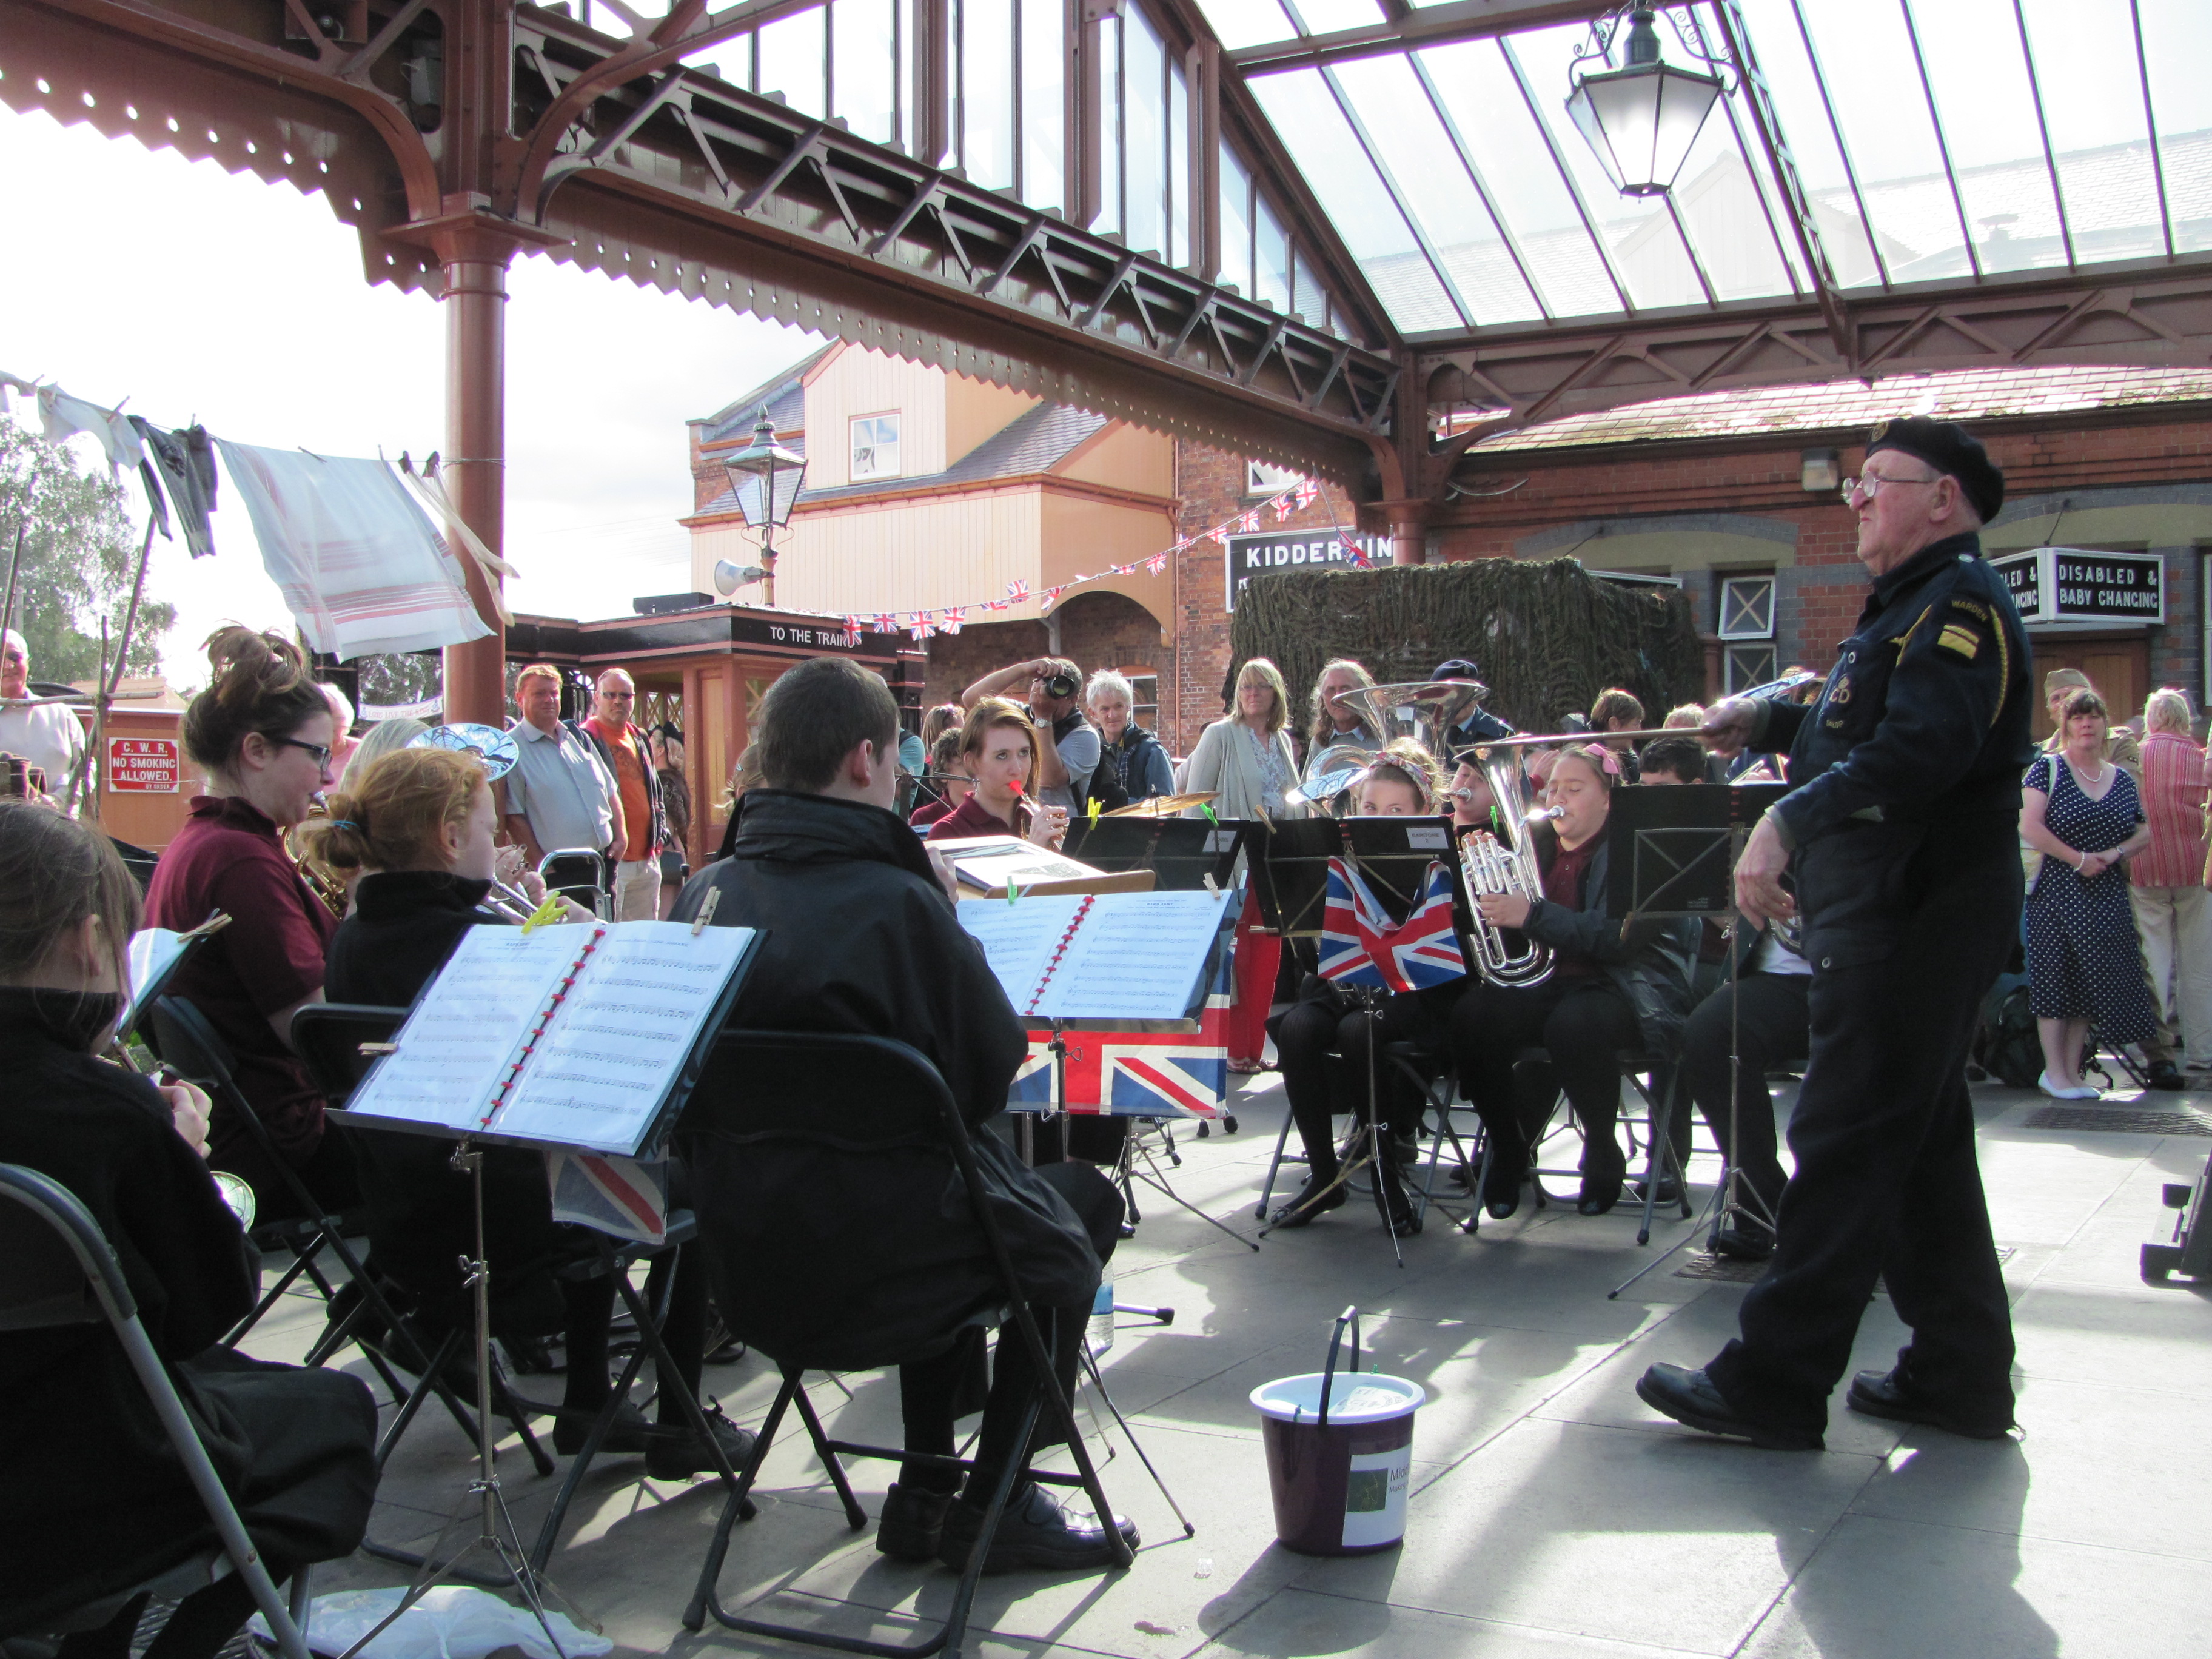 Peter Hasket conducts the youth band at Kidderminster 2012